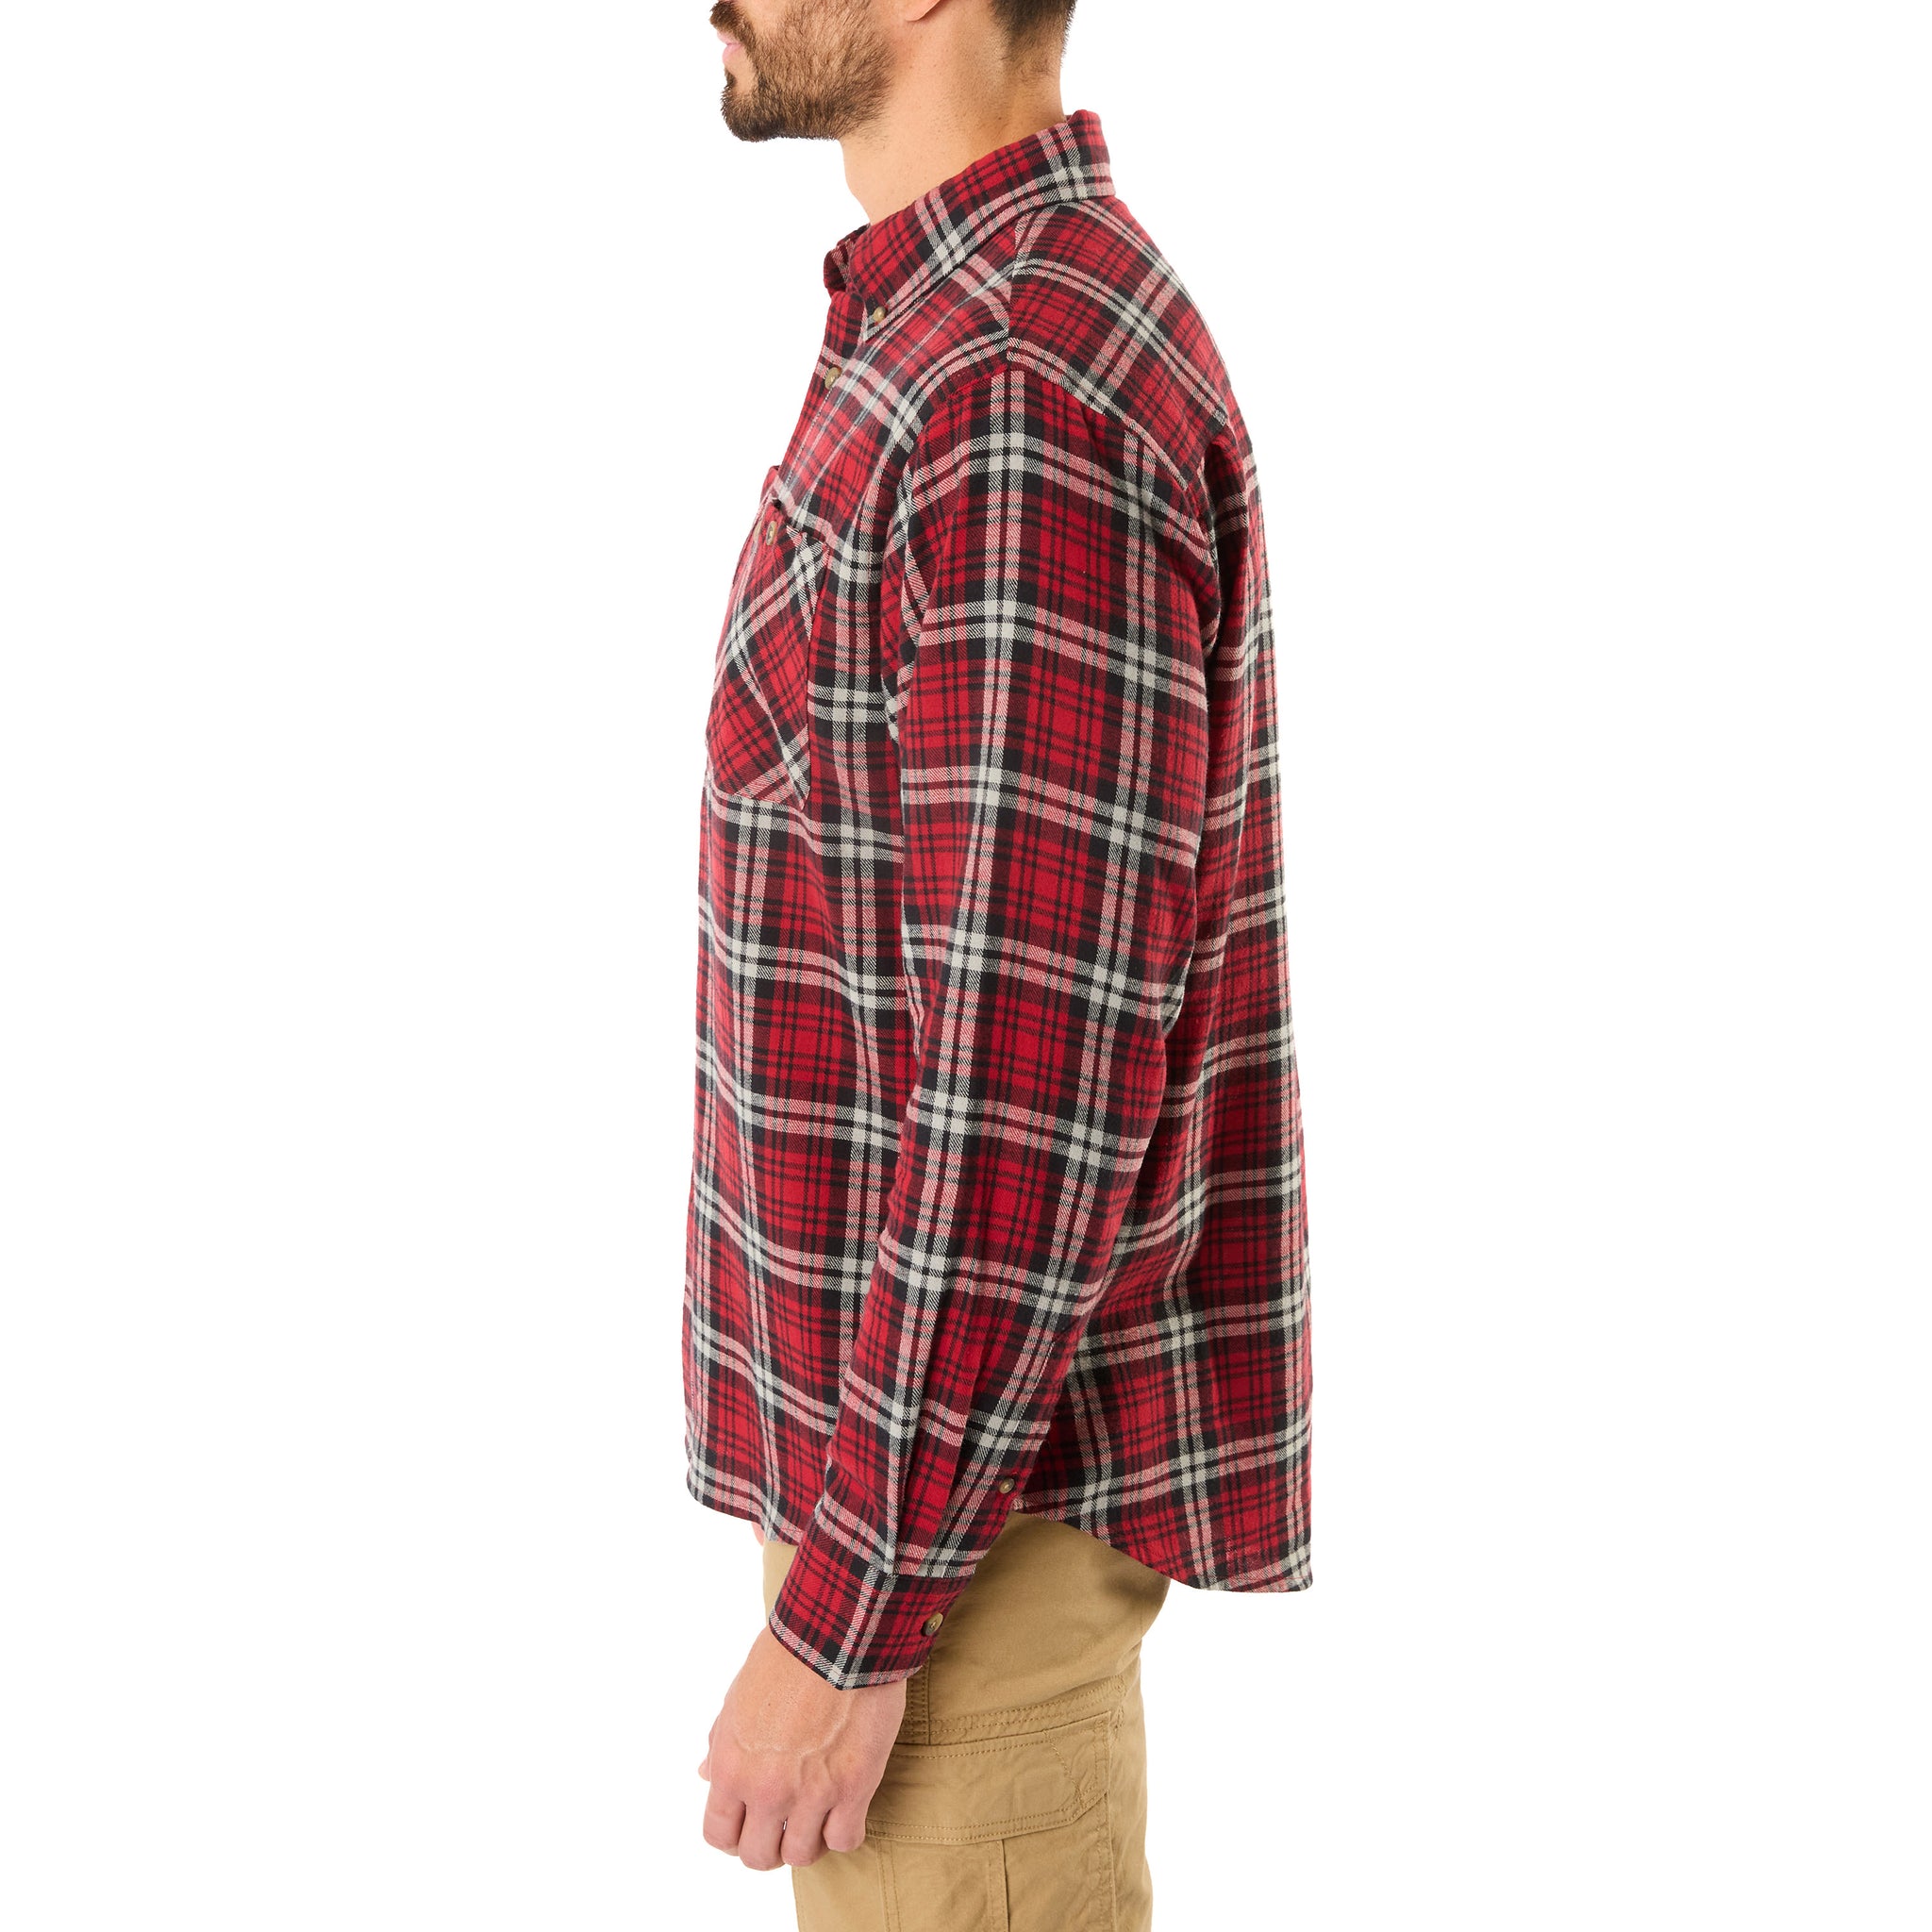 TWO-POCKET BUTTON DOWN FLANNEL SHIRT